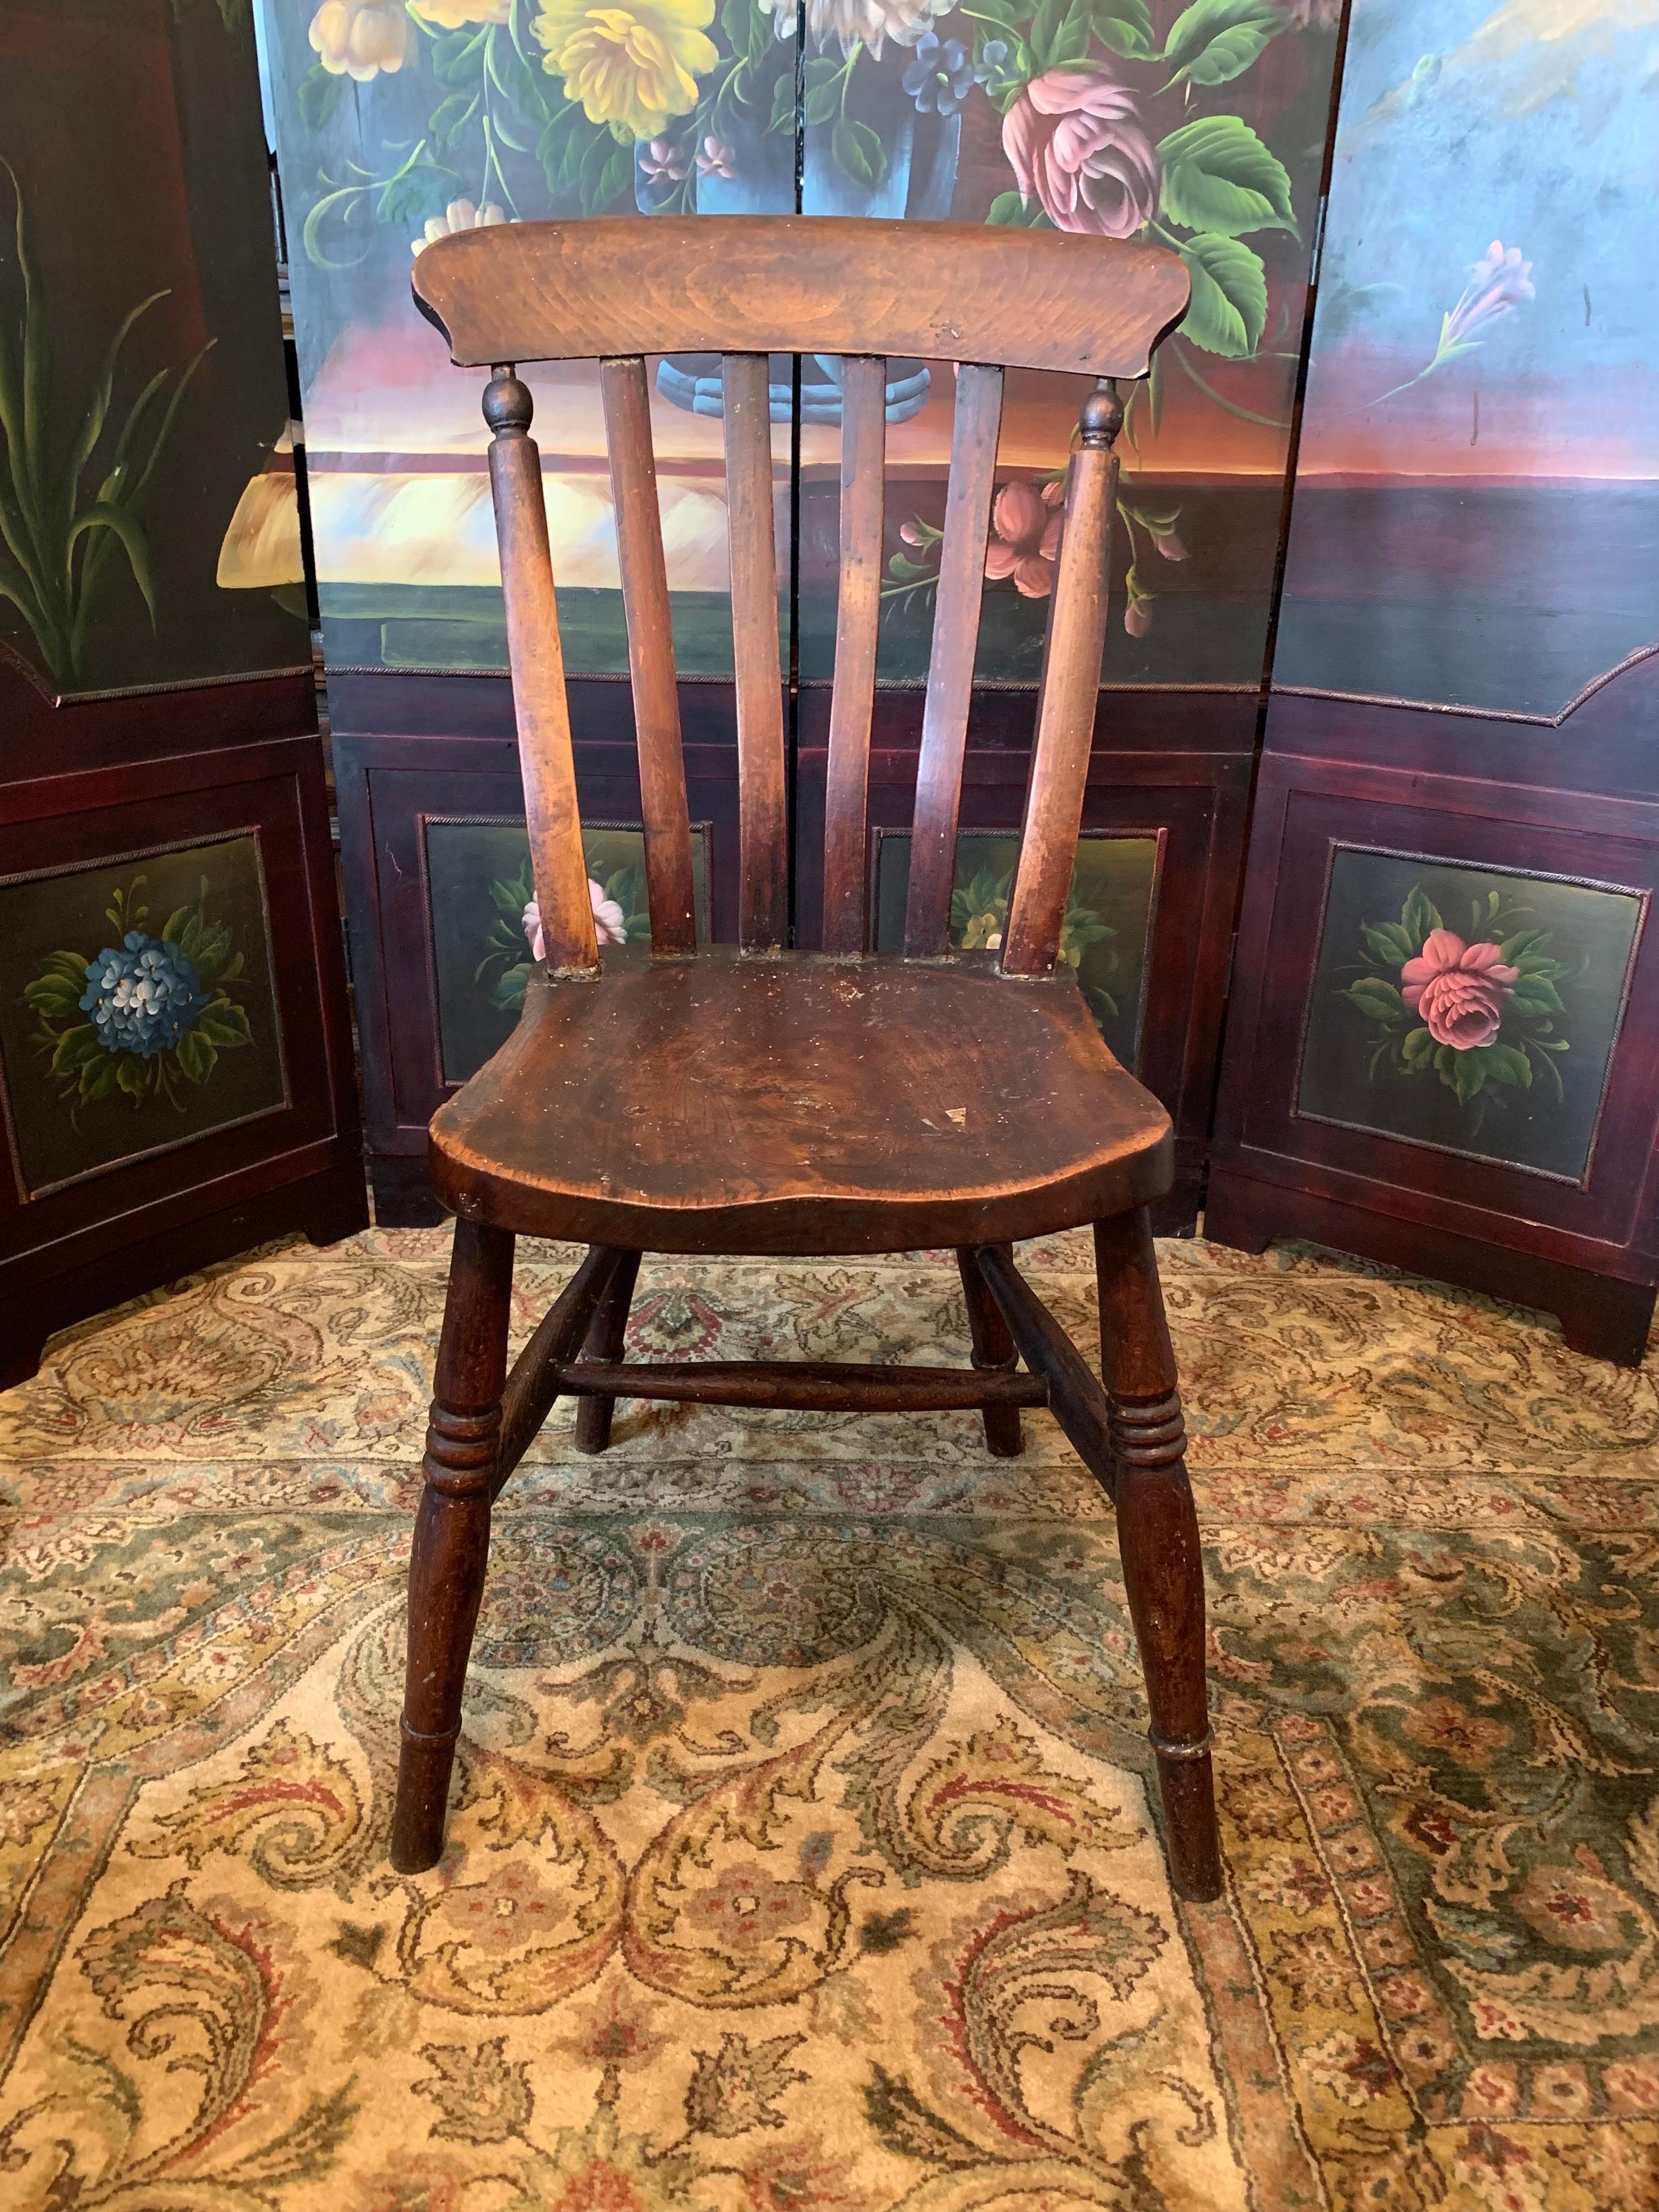 This is a truly rare opportunity to own an authentic one-of-a-kind piece of worldly history.  Originating from the picturesque rolling countryside of Lancashire, England circa 1650-1670 and brought to North America in the late 17th century settling